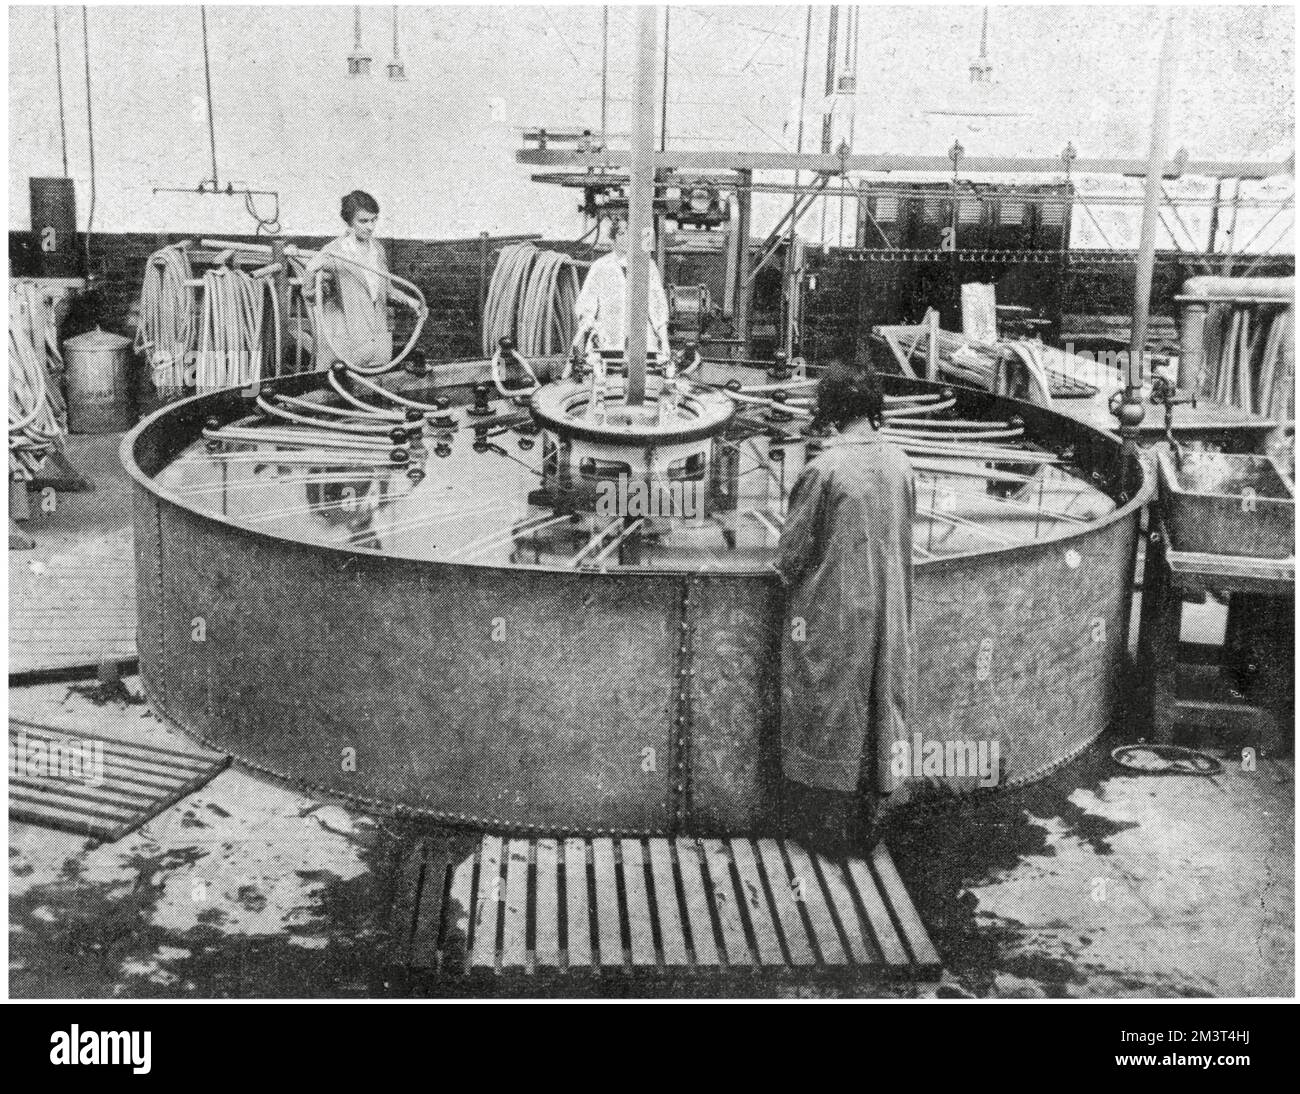 The original tyre factory for Dunlop Tyres at Fort Dunlop in the Erdington district of Birmingham. A tank for testing inner tubes. The tubes are inflated and stretched in the submerging. Stock Photo